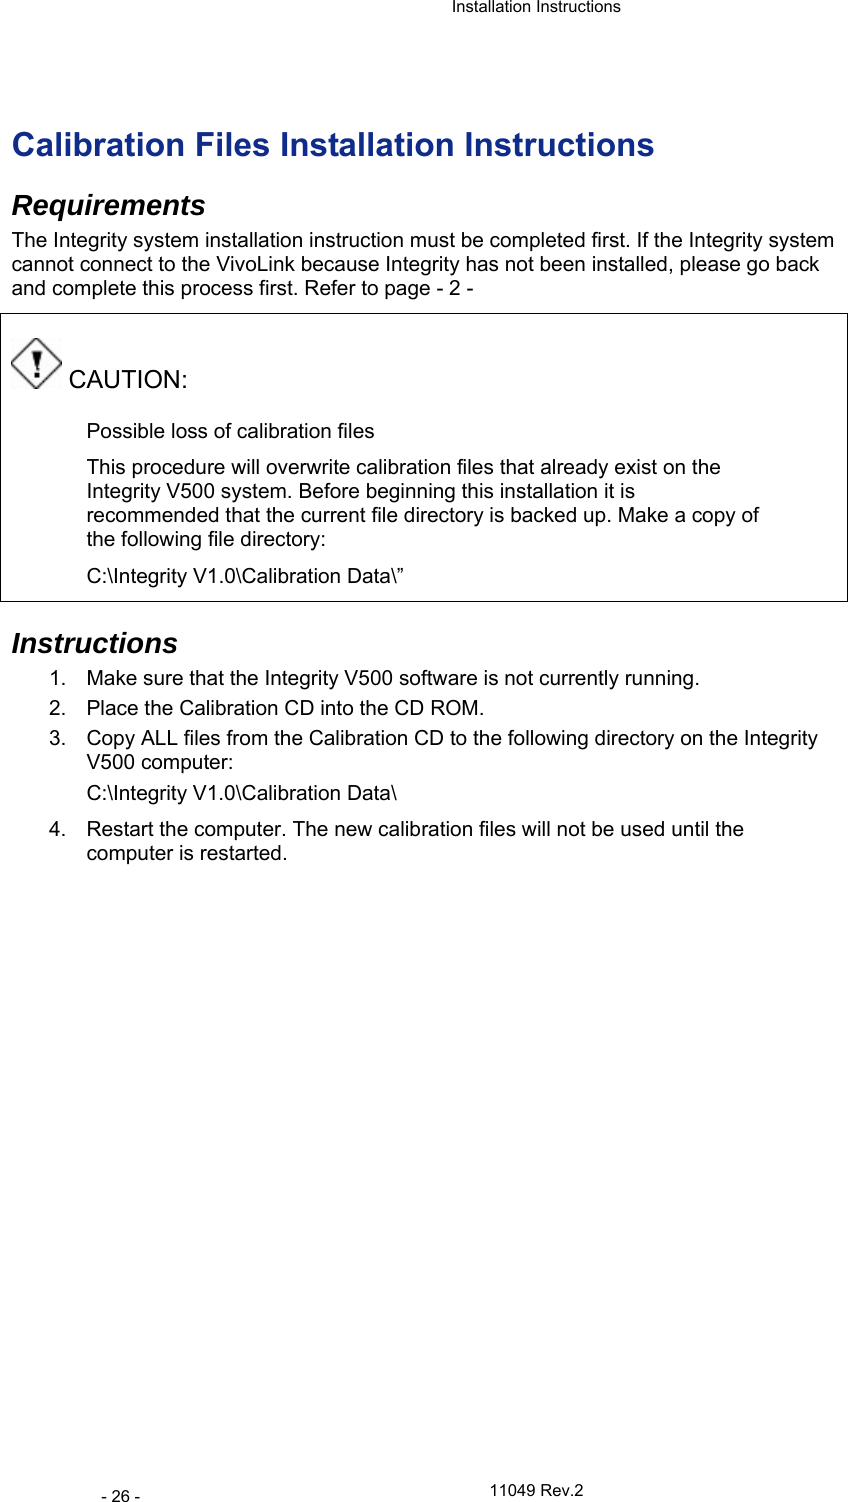  Installation Instructions   11049 Rev.2 - 26 -  Calibration Files Installation Instructions Requirements The Integrity system installation instruction must be completed first. If the Integrity system cannot connect to the VivoLink because Integrity has not been installed, please go back and complete this process first. Refer to page - 2 -  CAUTION: Possible loss of calibration files This procedure will overwrite calibration files that already exist on the Integrity V500 system. Before beginning this installation it is recommended that the current file directory is backed up. Make a copy of the following file directory:  C:\Integrity V1.0\Calibration Data\”  Instructions 1.  Make sure that the Integrity V500 software is not currently running.  2.  Place the Calibration CD into the CD ROM.  3.  Copy ALL files from the Calibration CD to the following directory on the Integrity V500 computer:  C:\Integrity V1.0\Calibration Data\ 4.  Restart the computer. The new calibration files will not be used until the computer is restarted.    